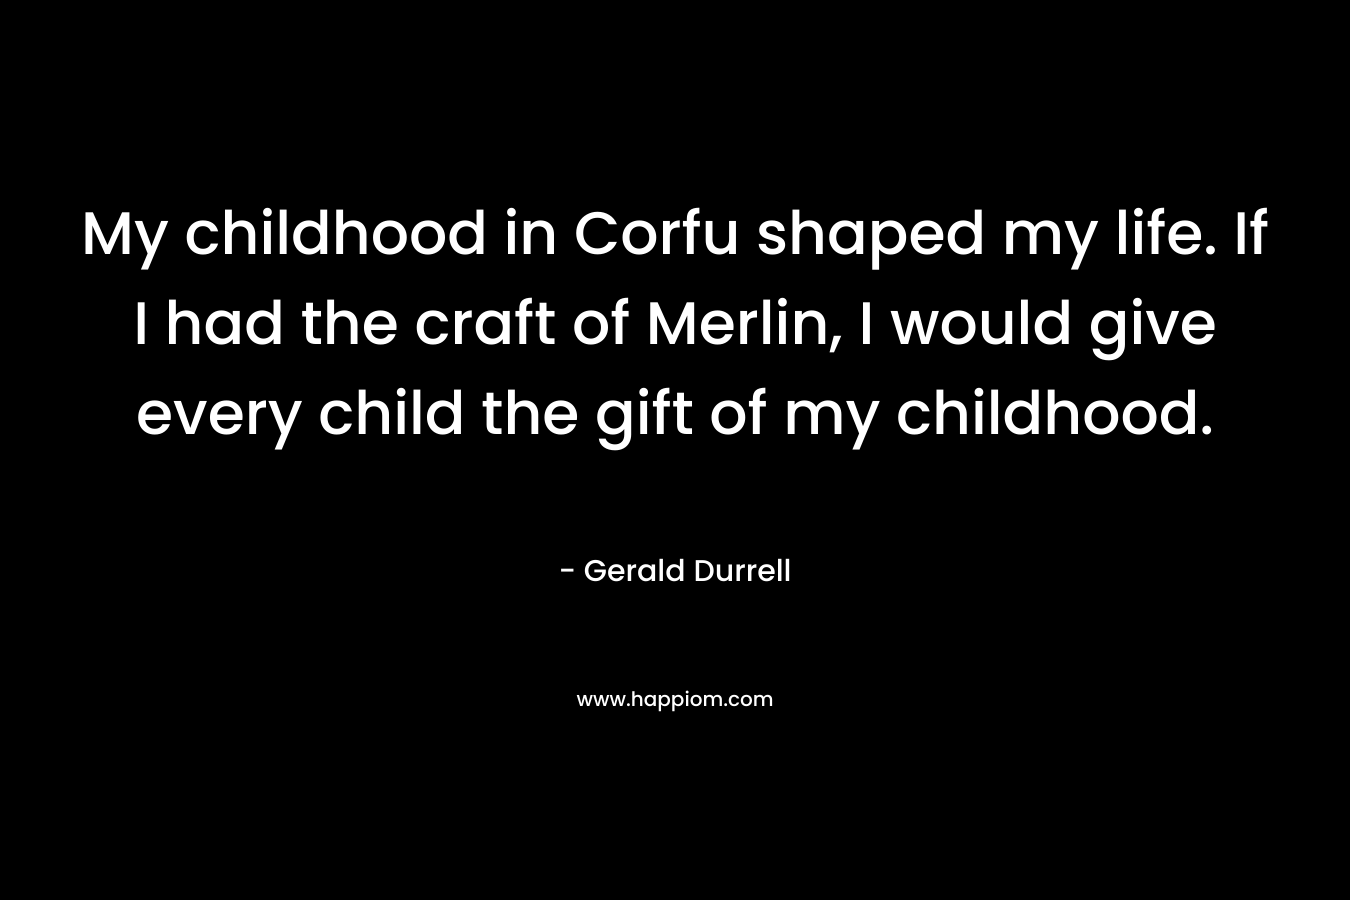 My childhood in Corfu shaped my life. If I had the craft of Merlin, I would give every child the gift of my childhood.